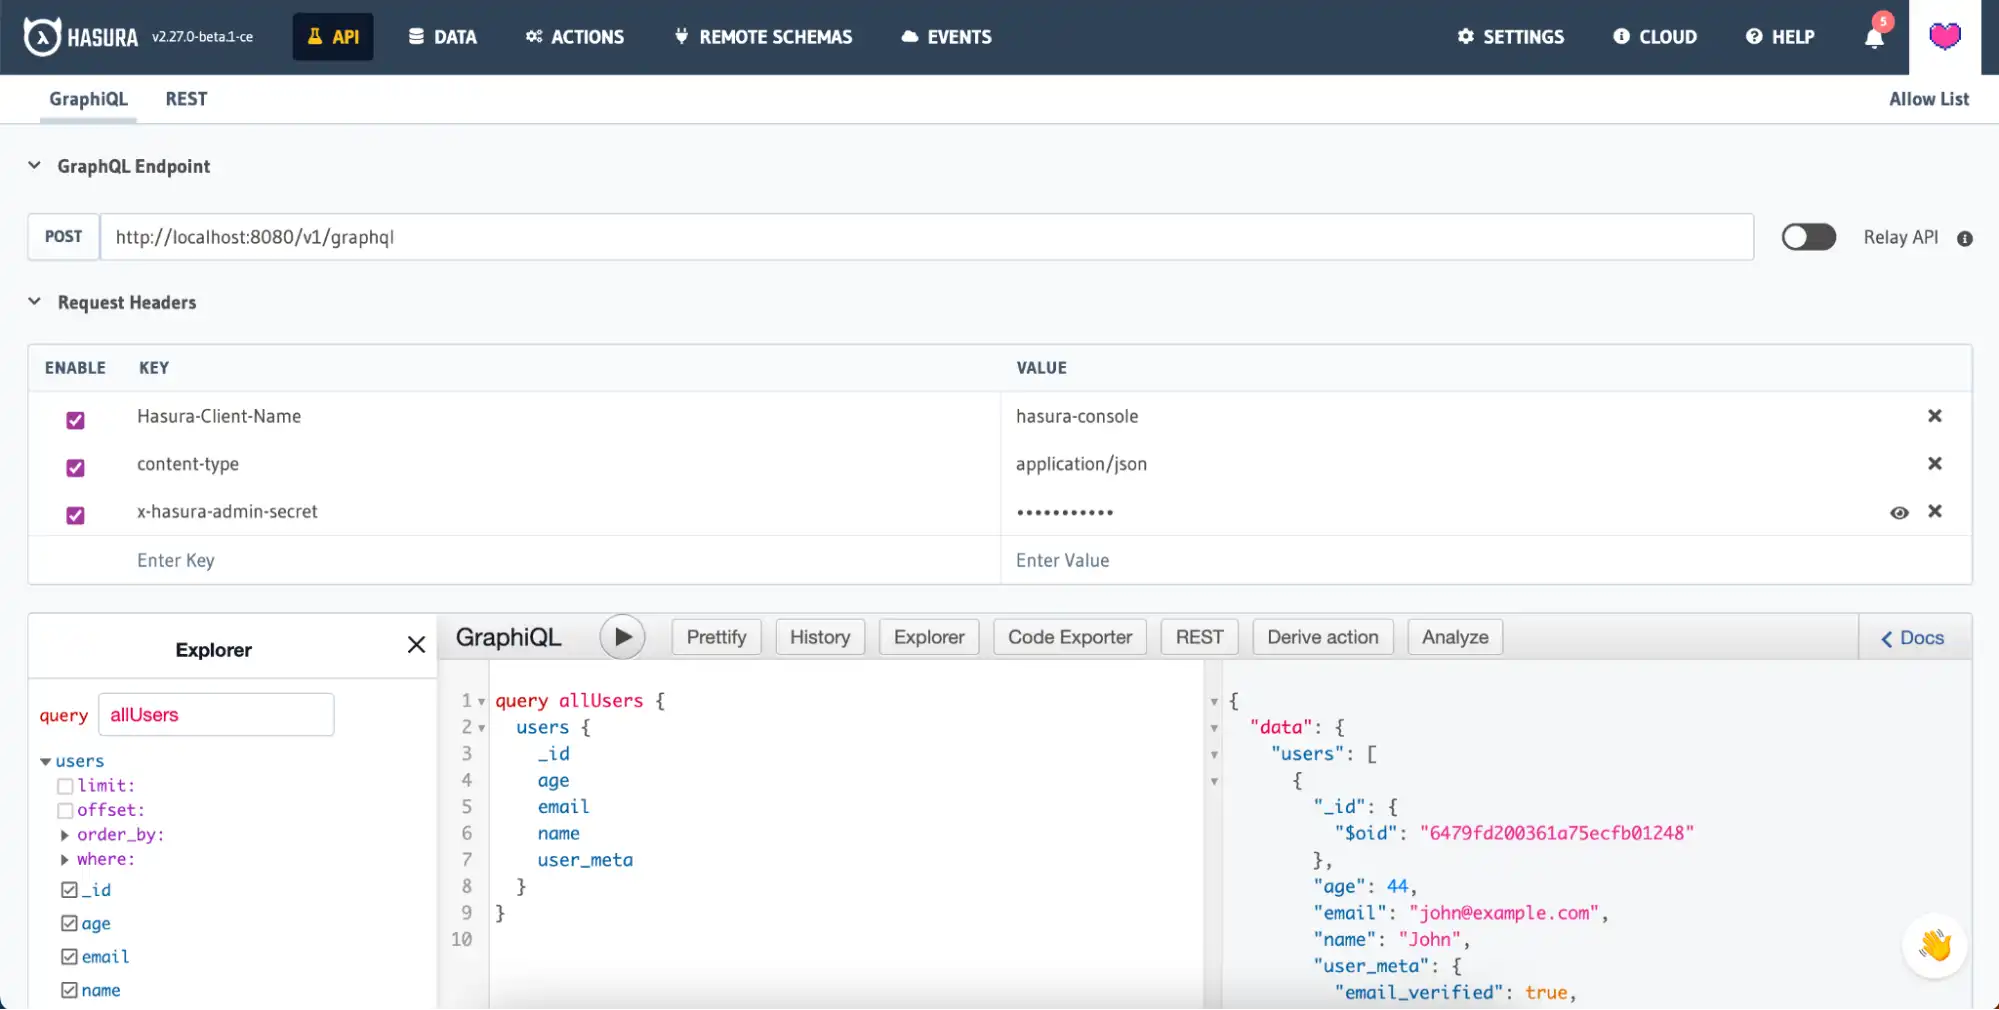 Use the GraphiQL interface to test queries.